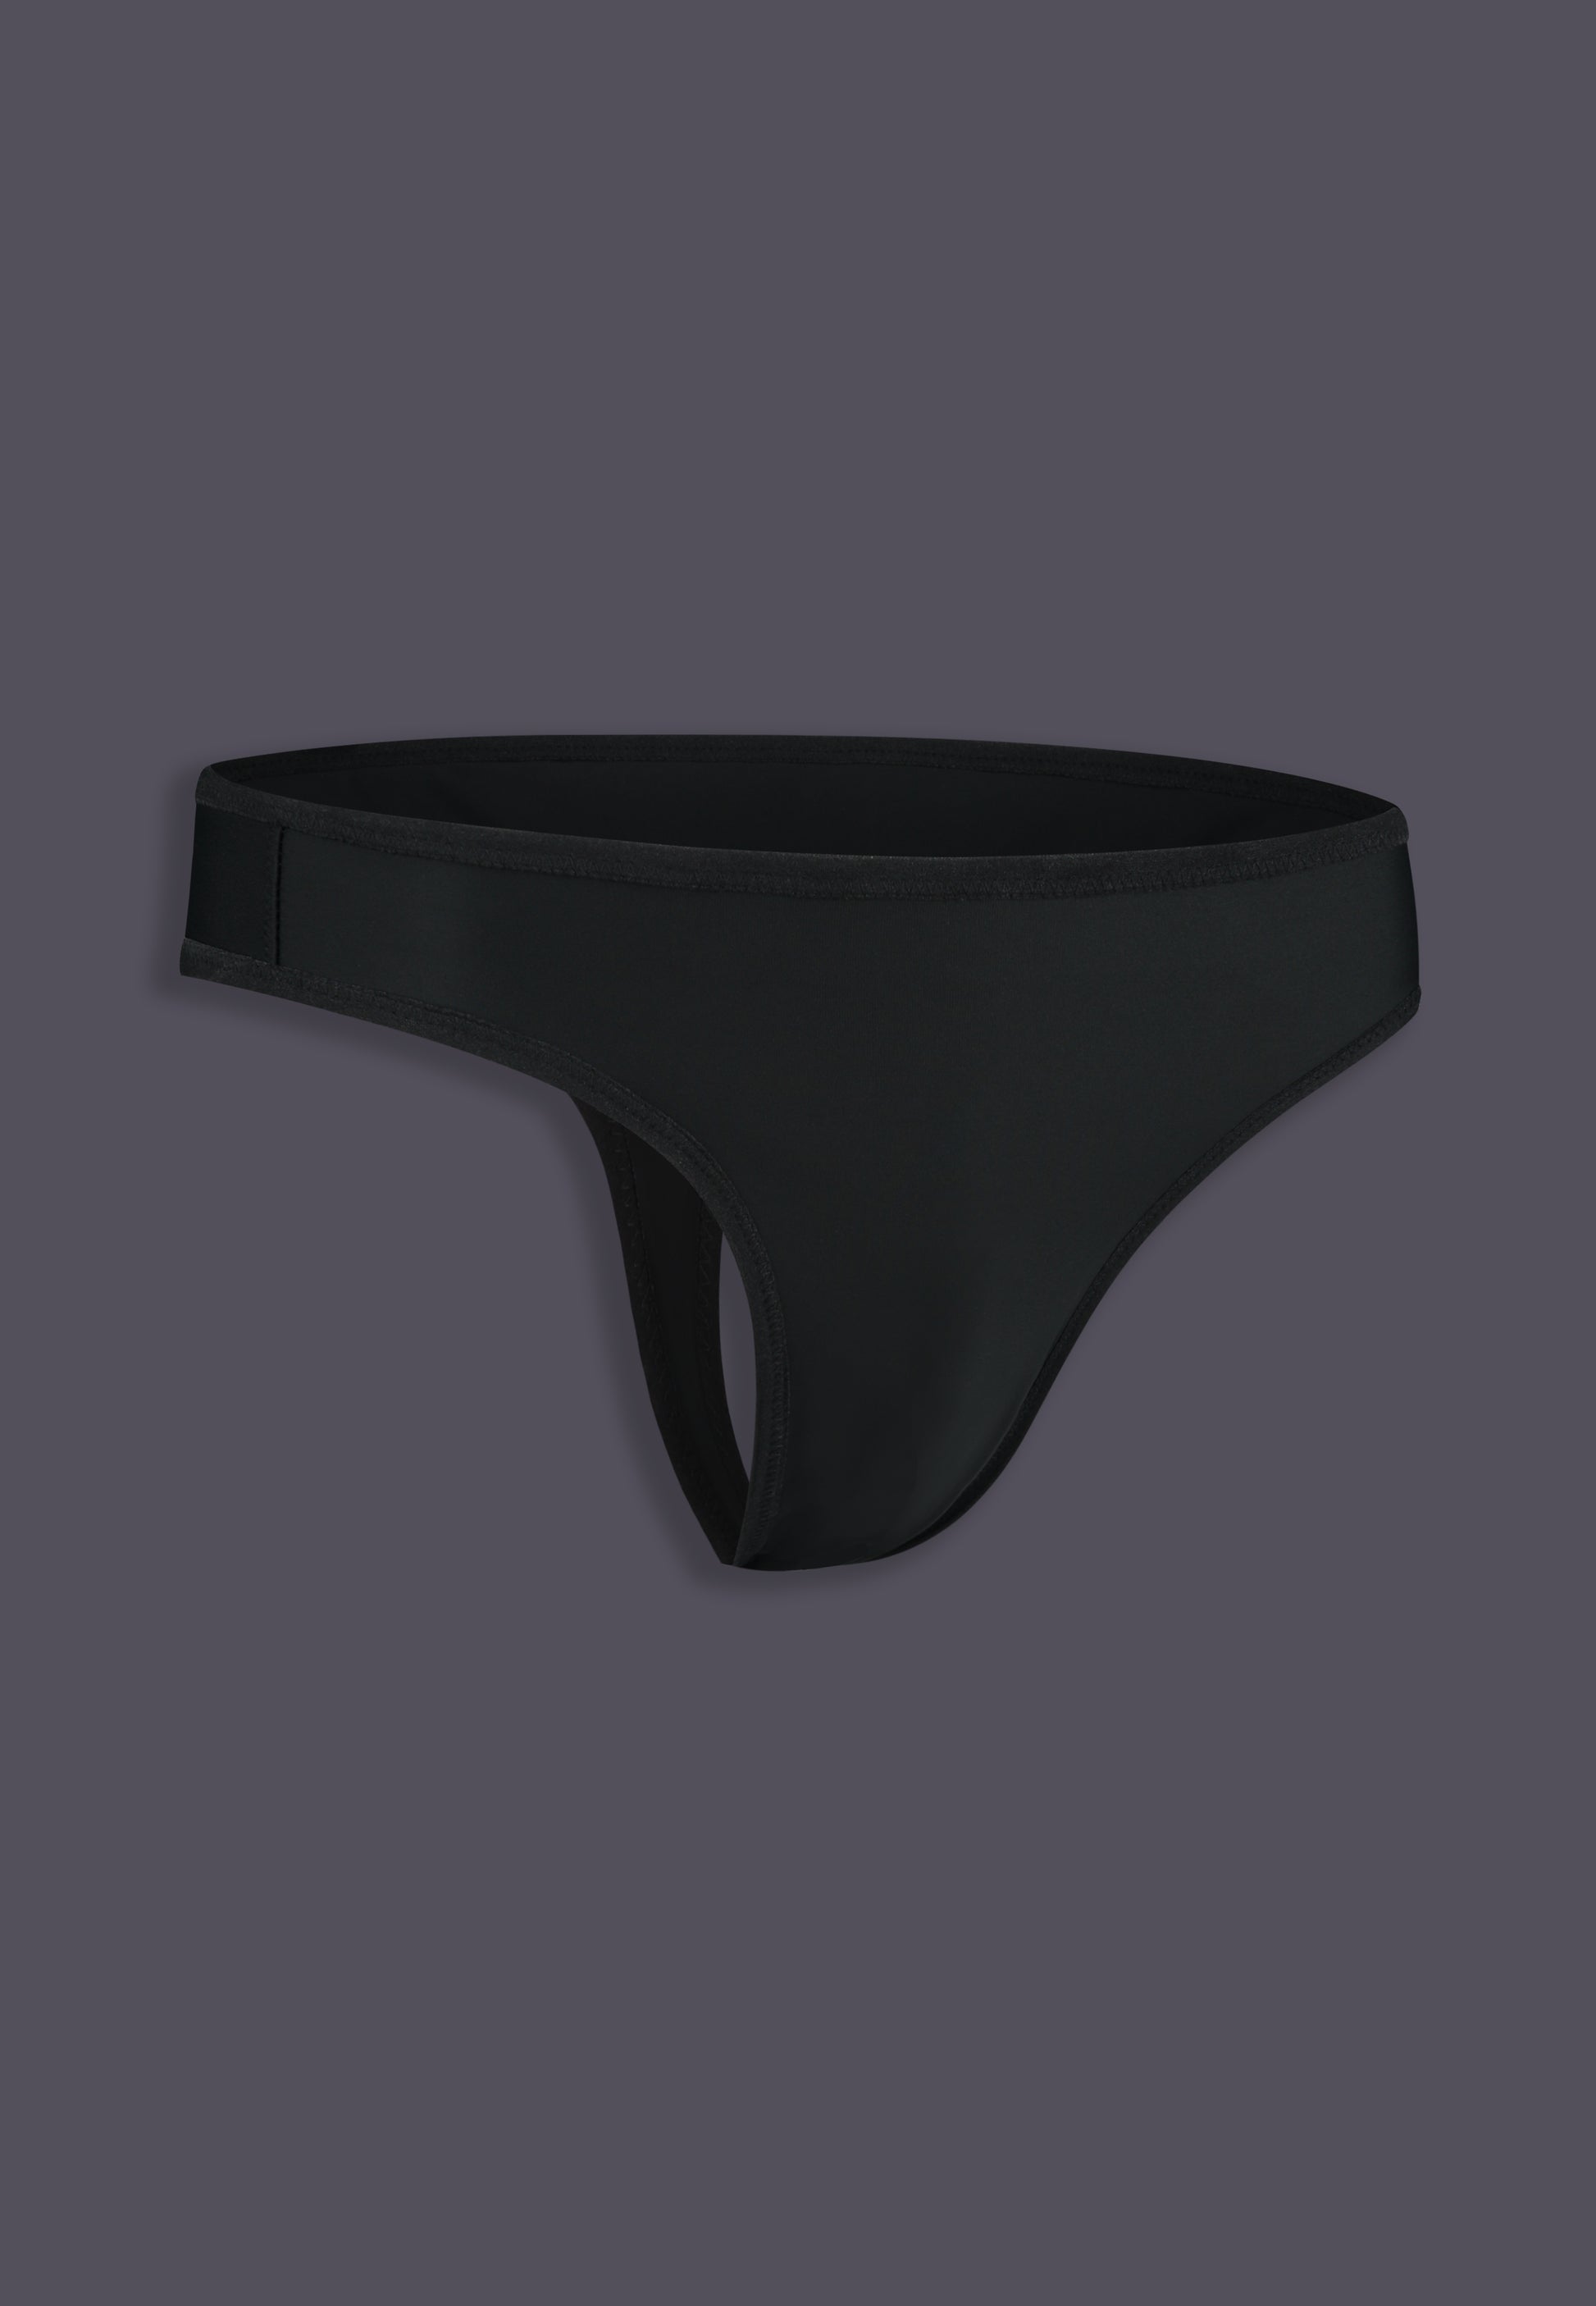 thai latex underwear - Buy thai latex underwear at Best Price in Malaysia